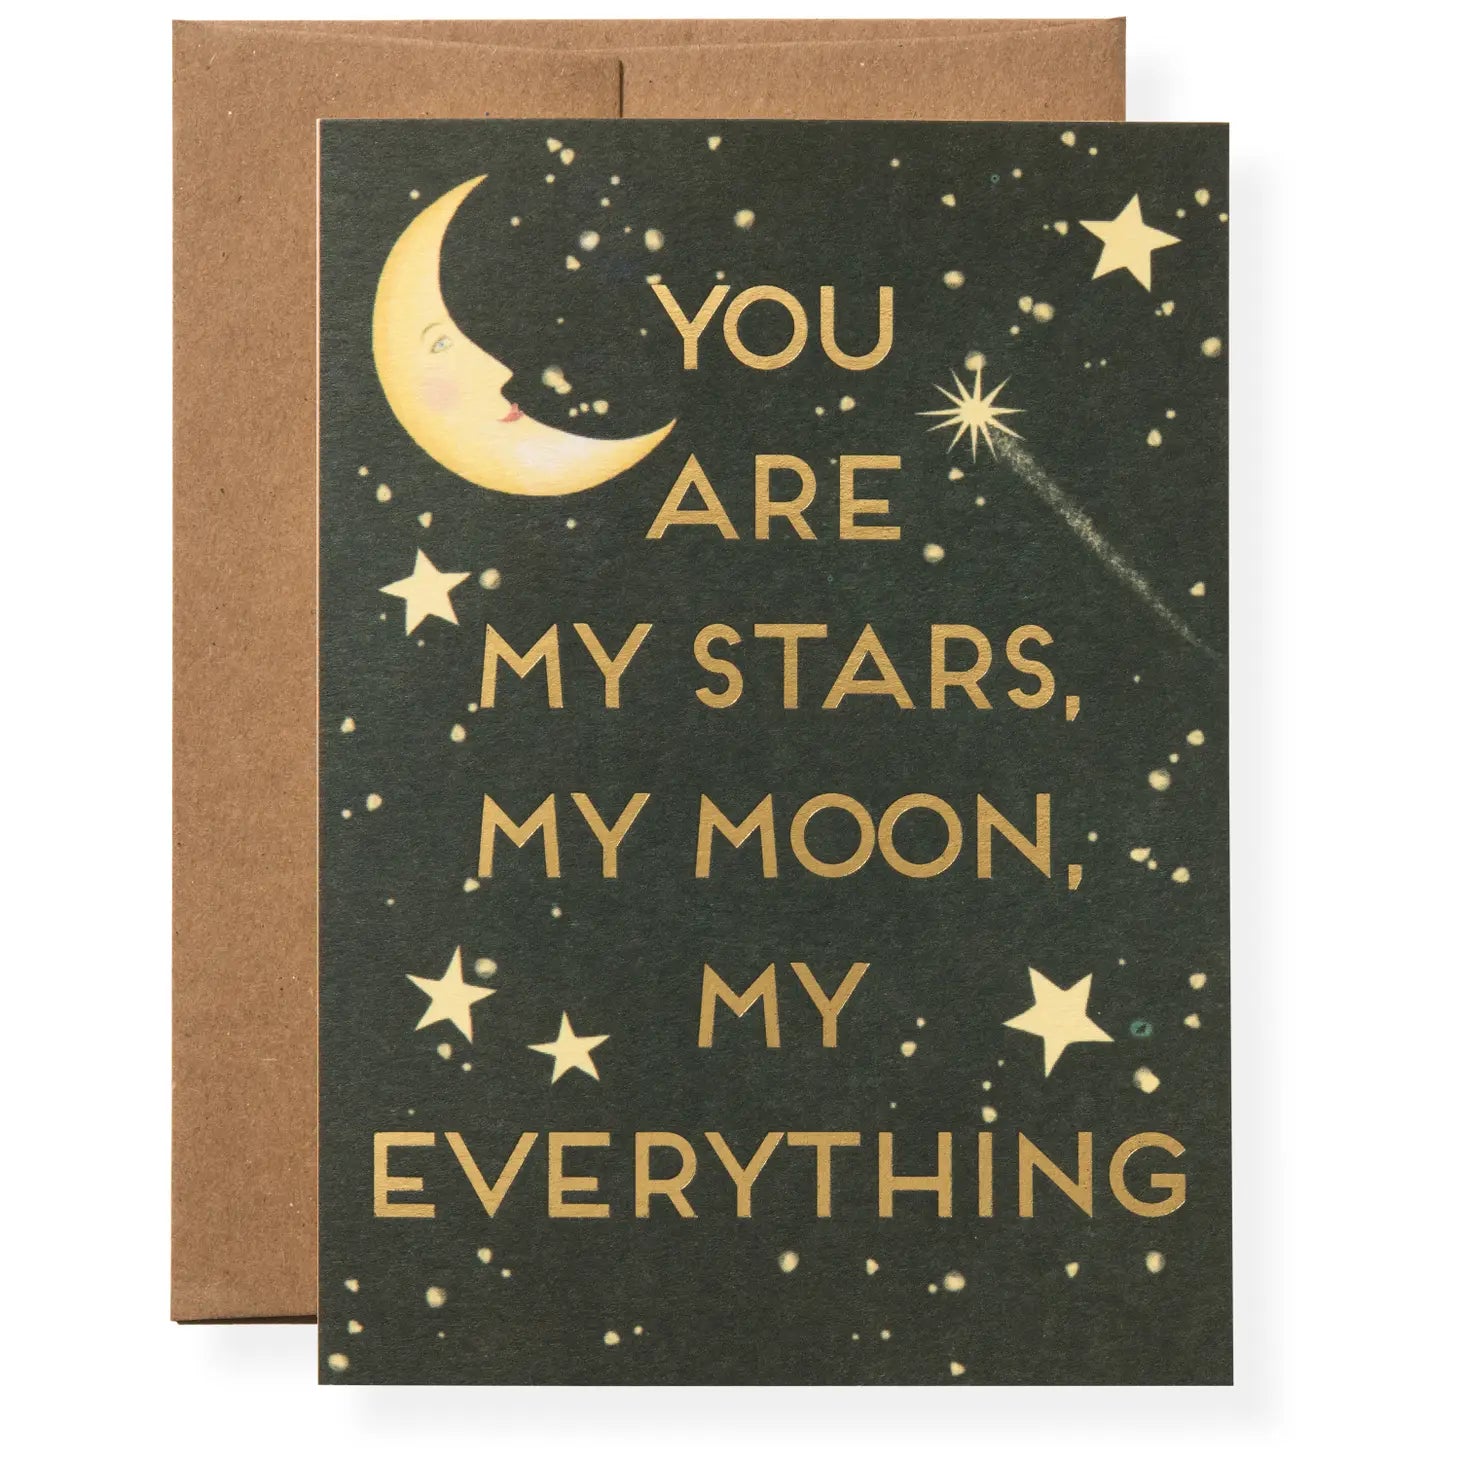 My Everything Greeting Card